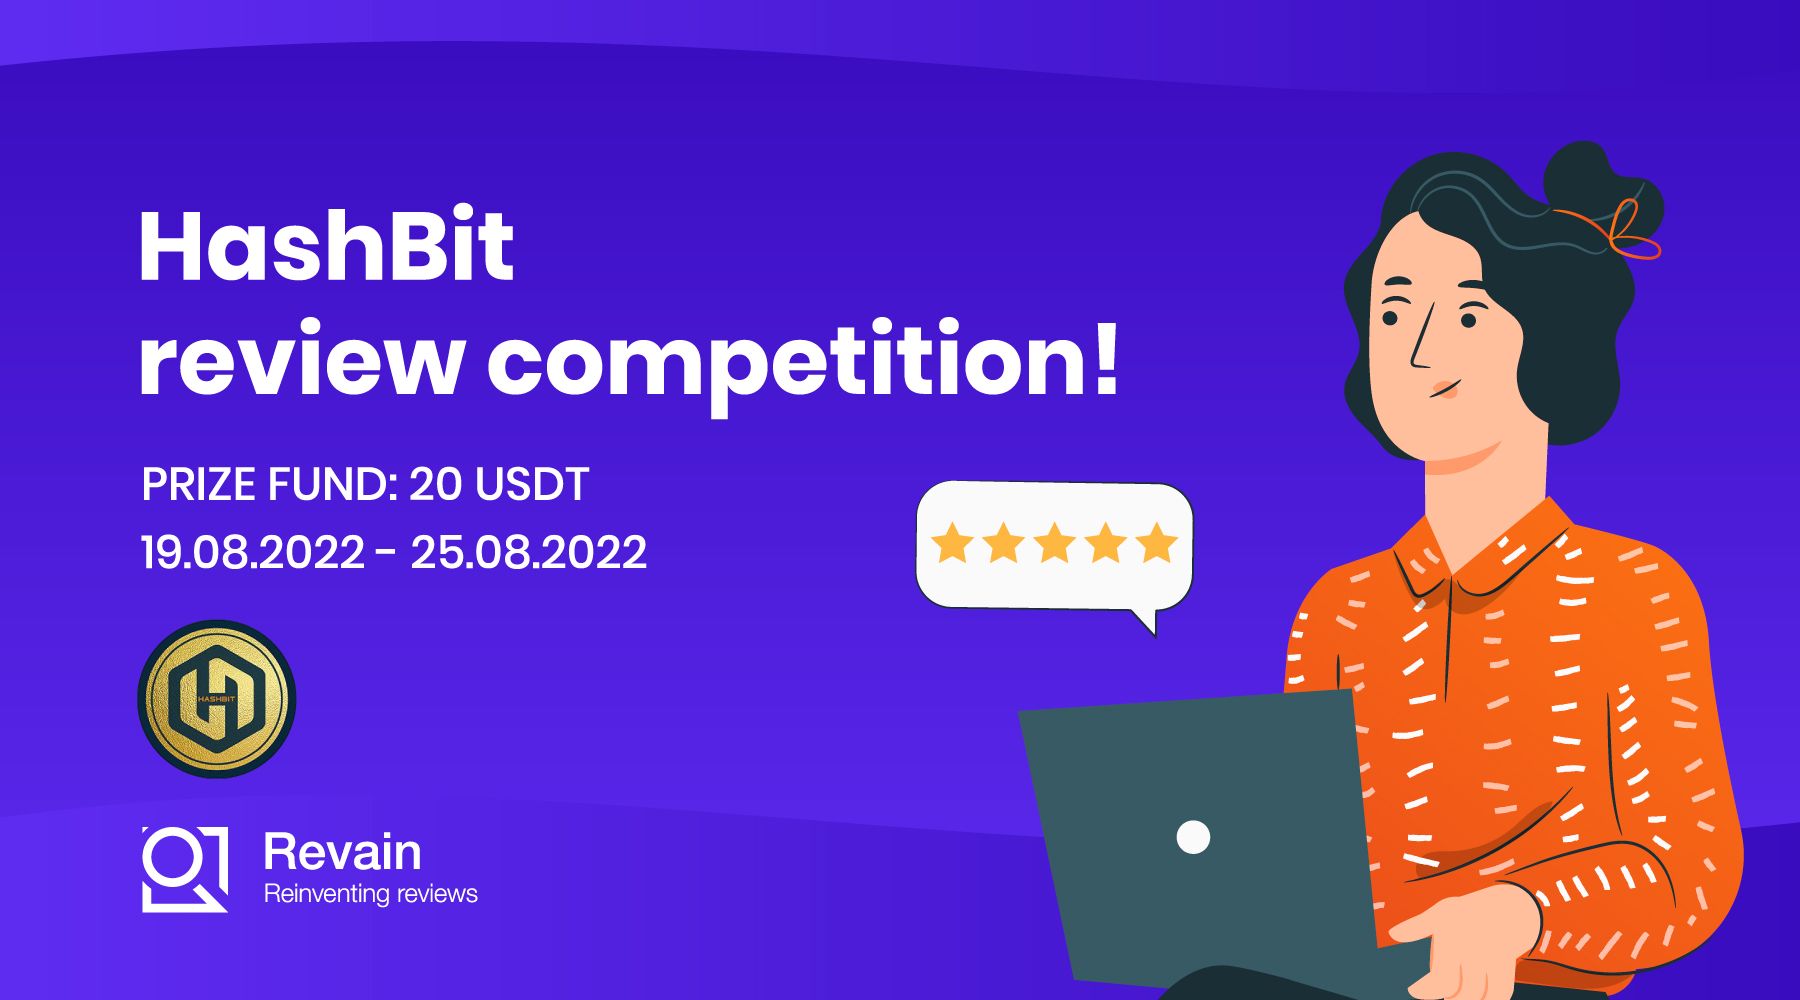 HashBit review competition!